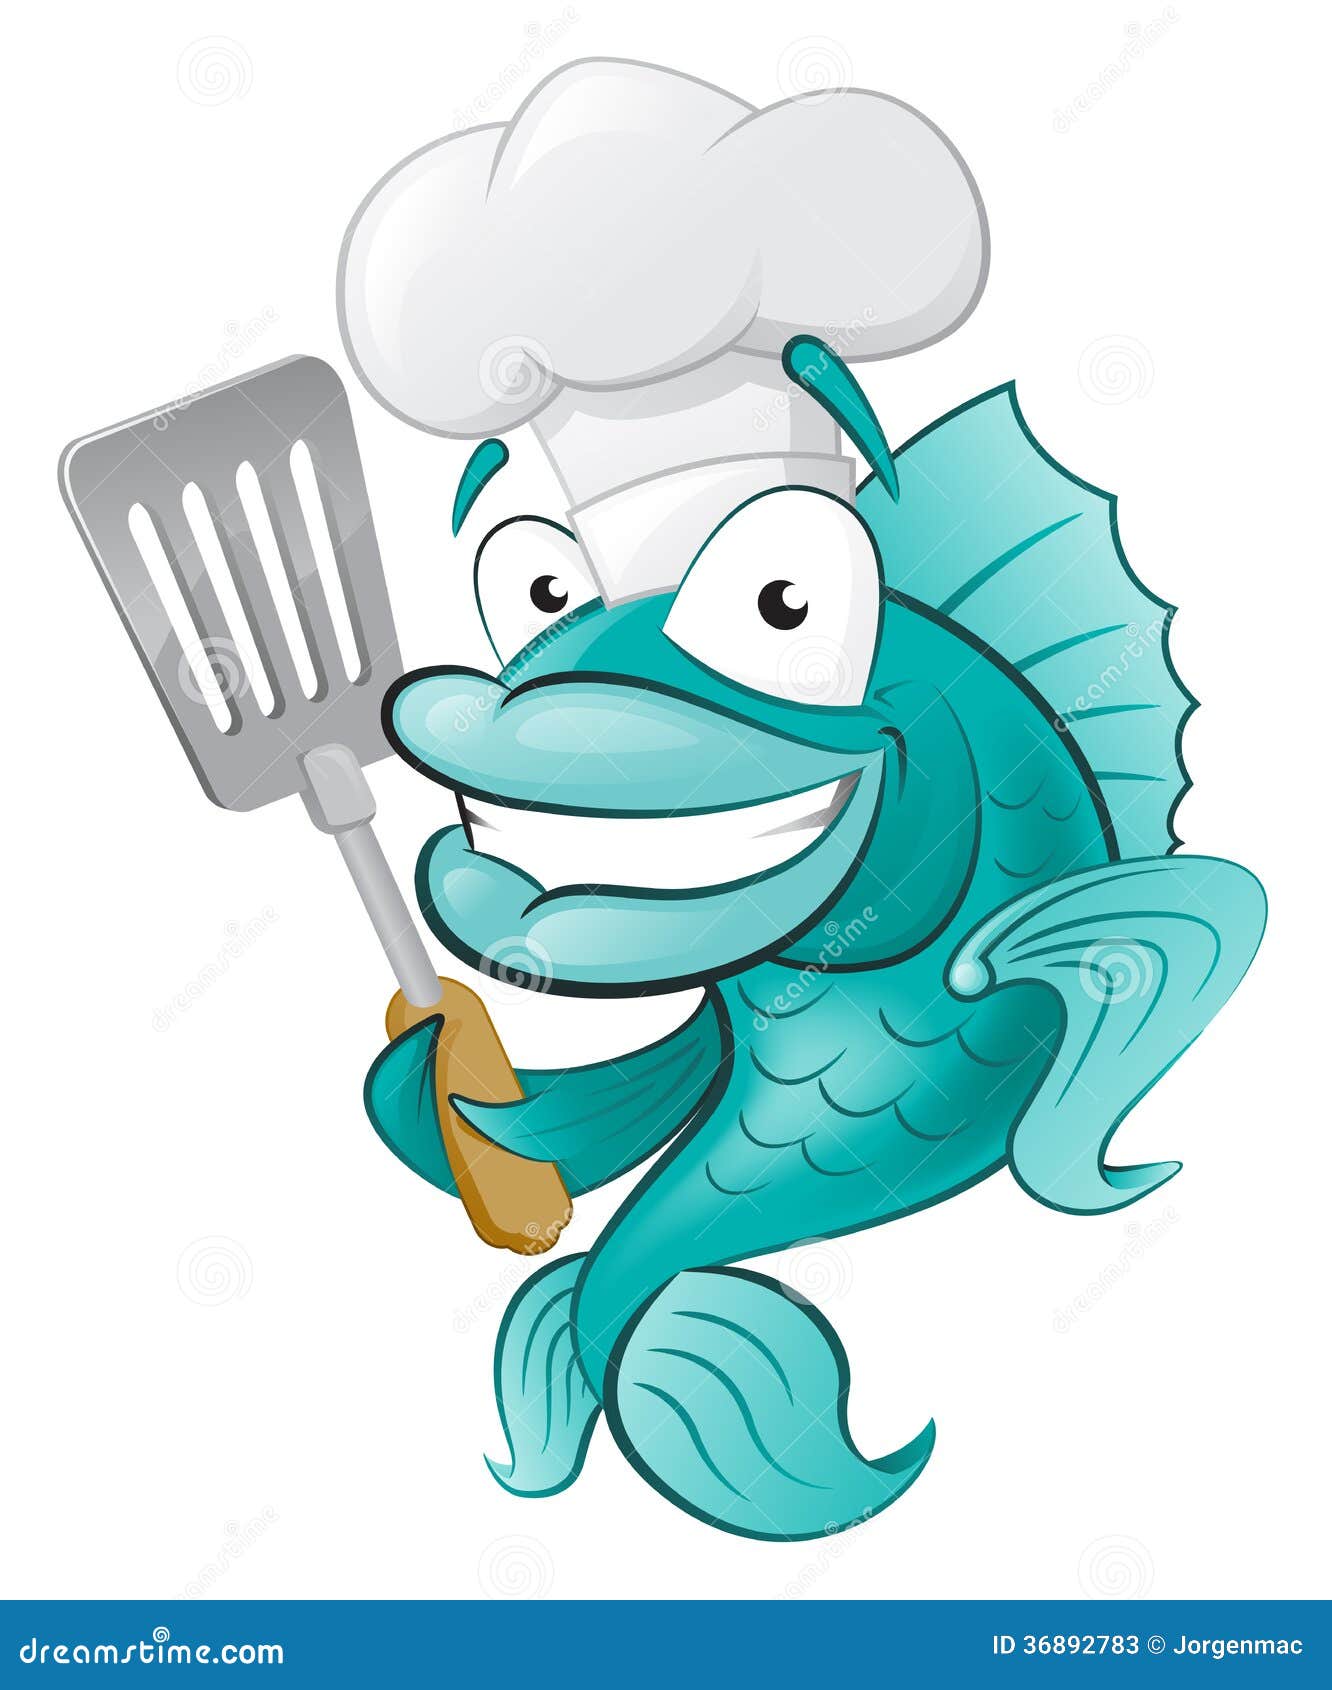 clipart fish and chips - photo #31